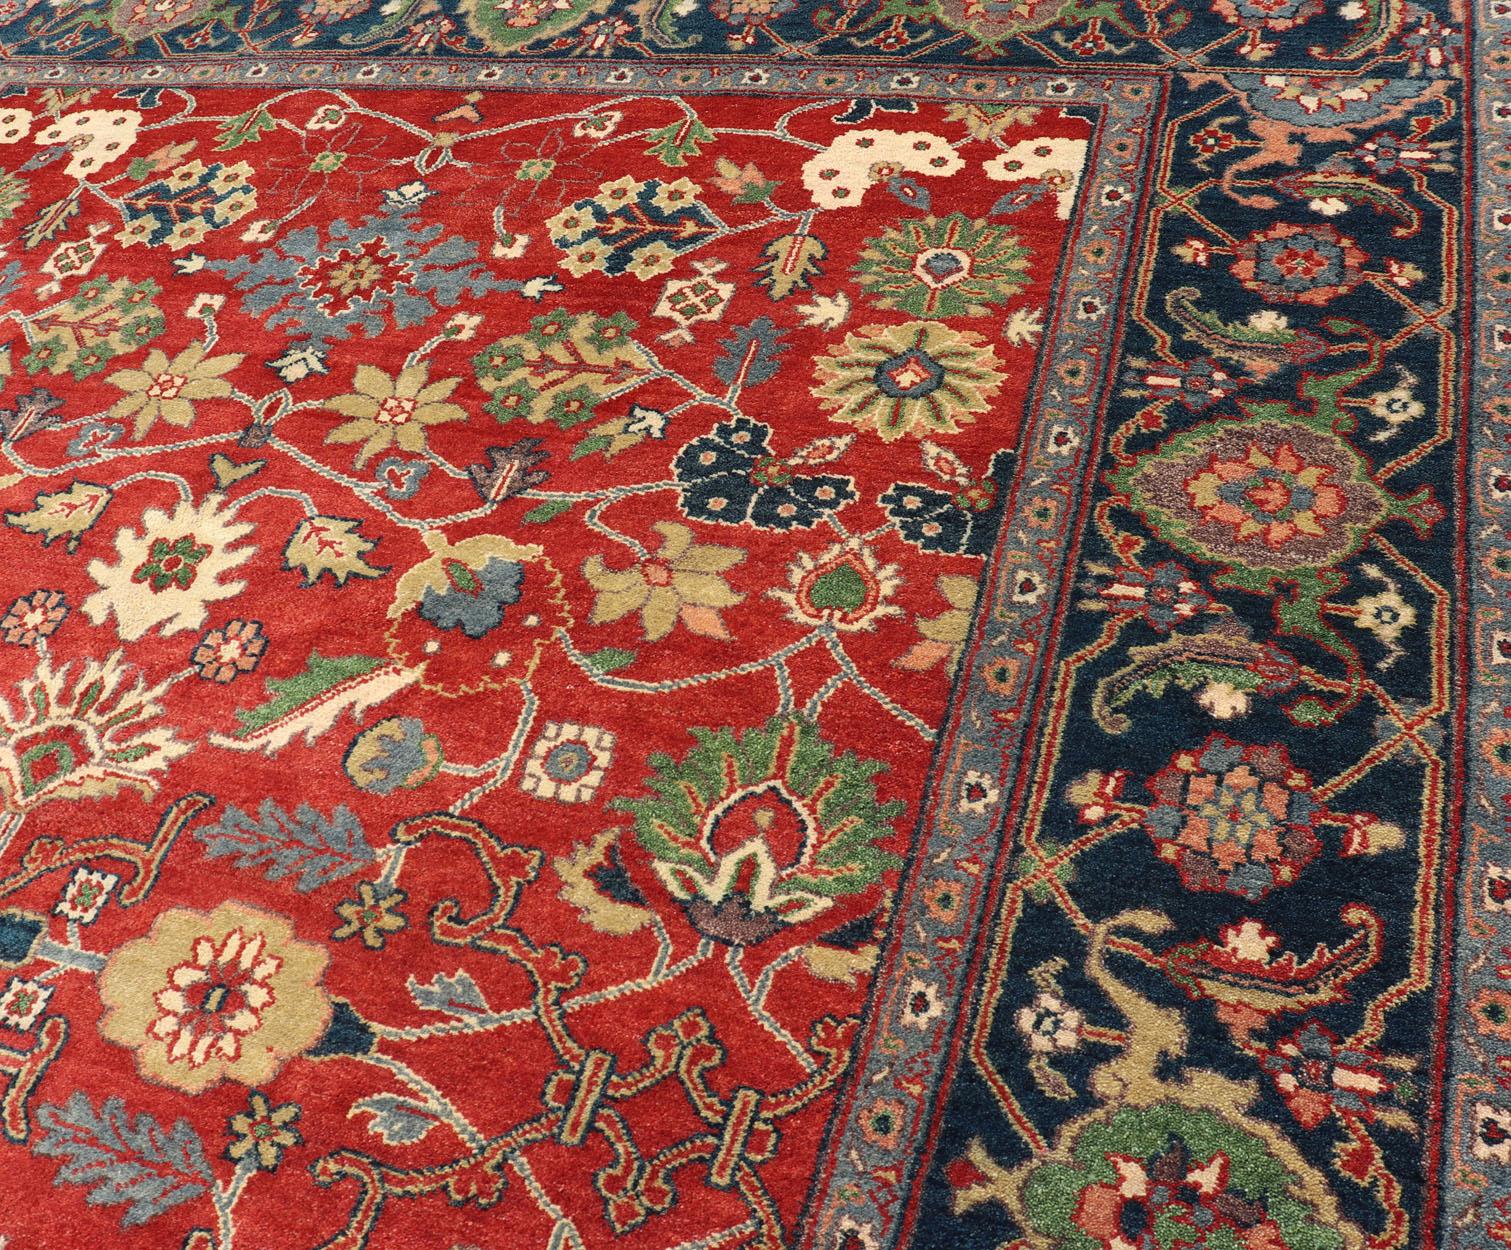 Reproduction Sultanabad-Mahal All-over Floral Hand-Knotted Carpet  4